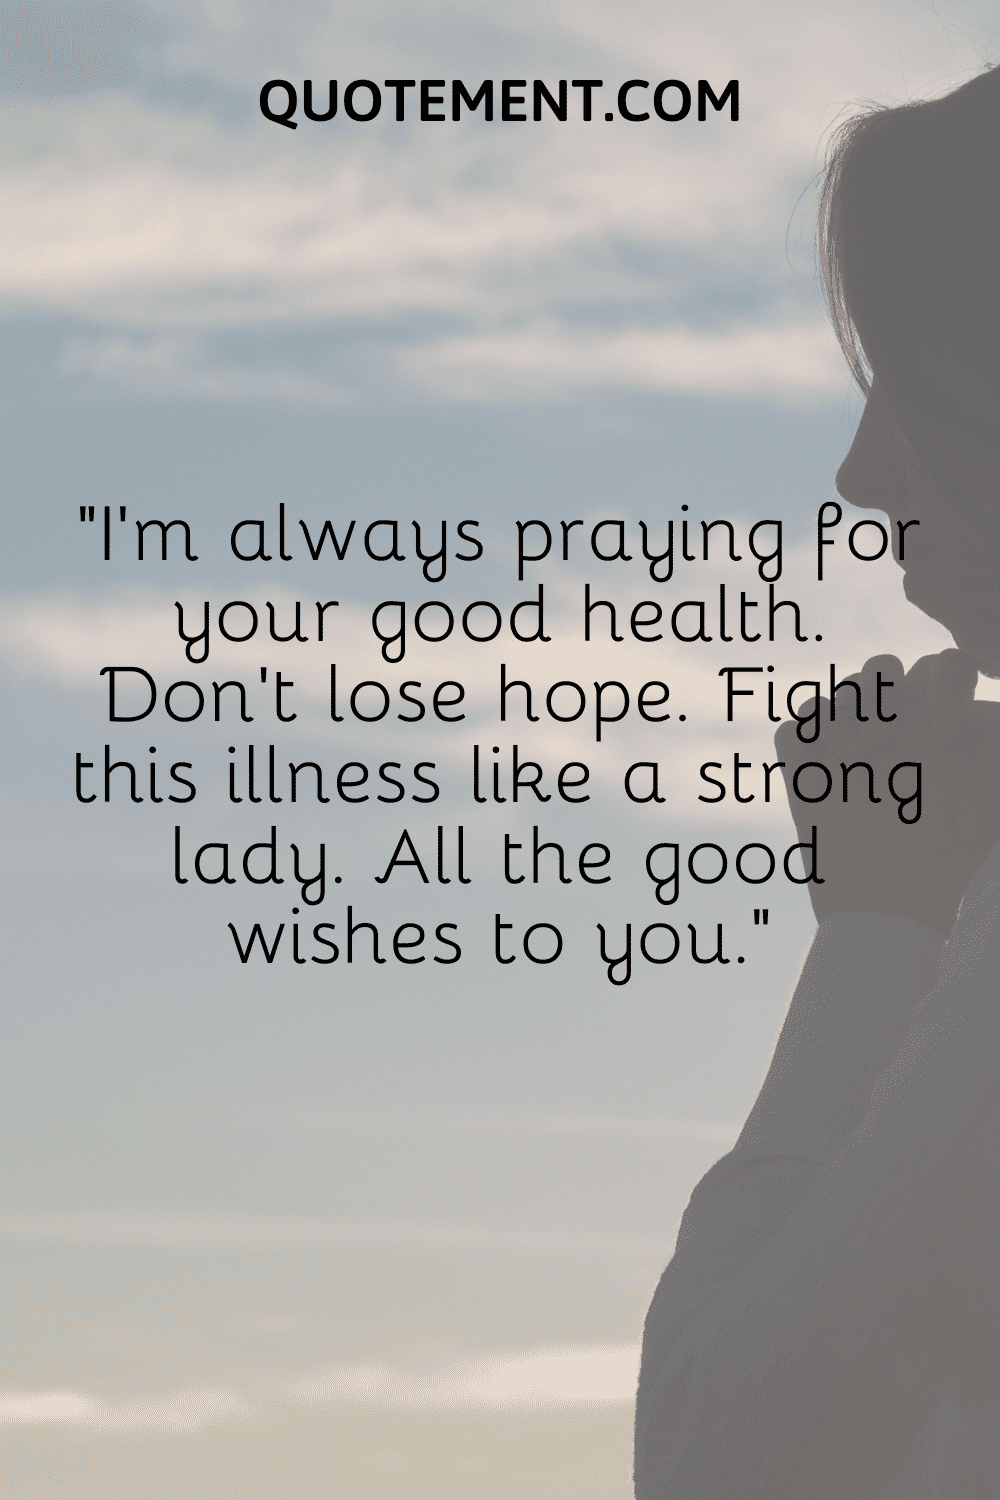 I’m always praying for your good health.